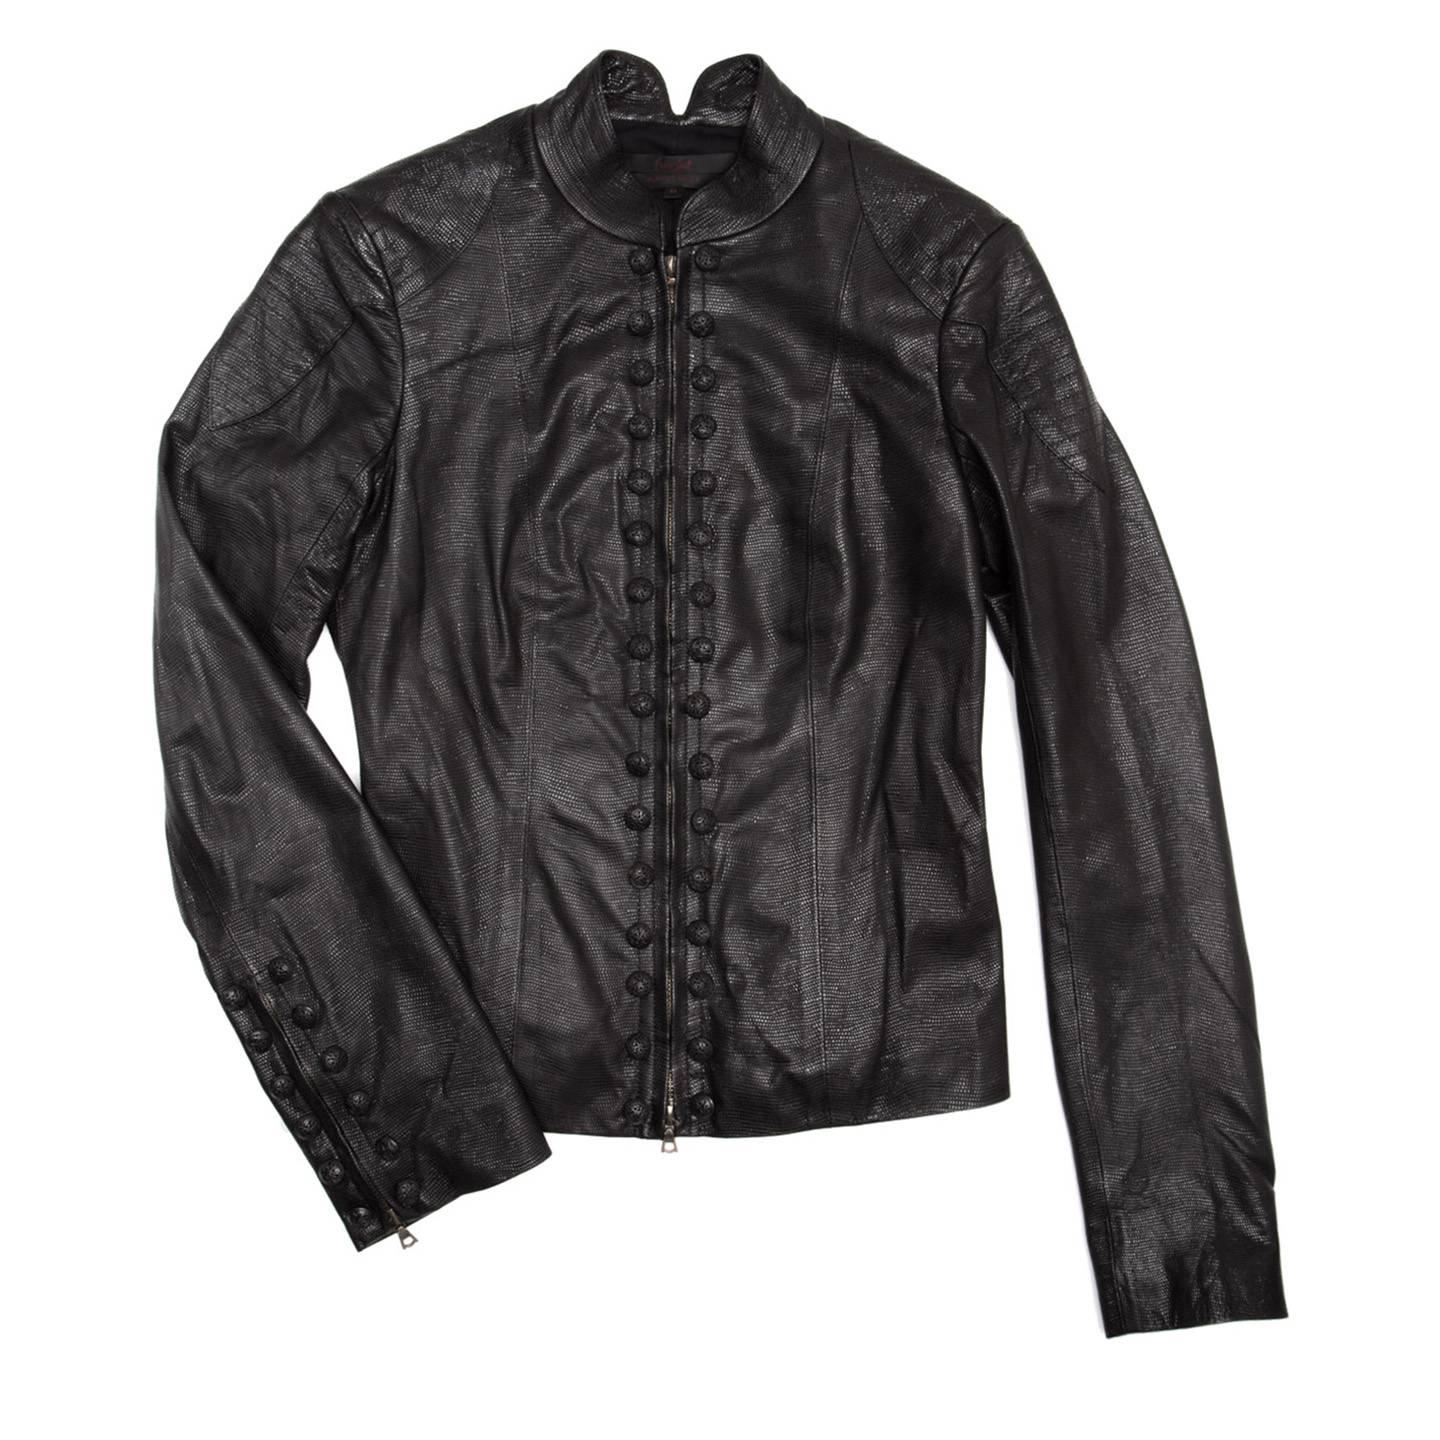 Black embossed leather motorcycle style jacket with patch details at shoulders and top sleeves enriched by top stitching as well as the standing collar and the lower back panel. The fit is cropped and tight, the front fastens with a bronze chunky